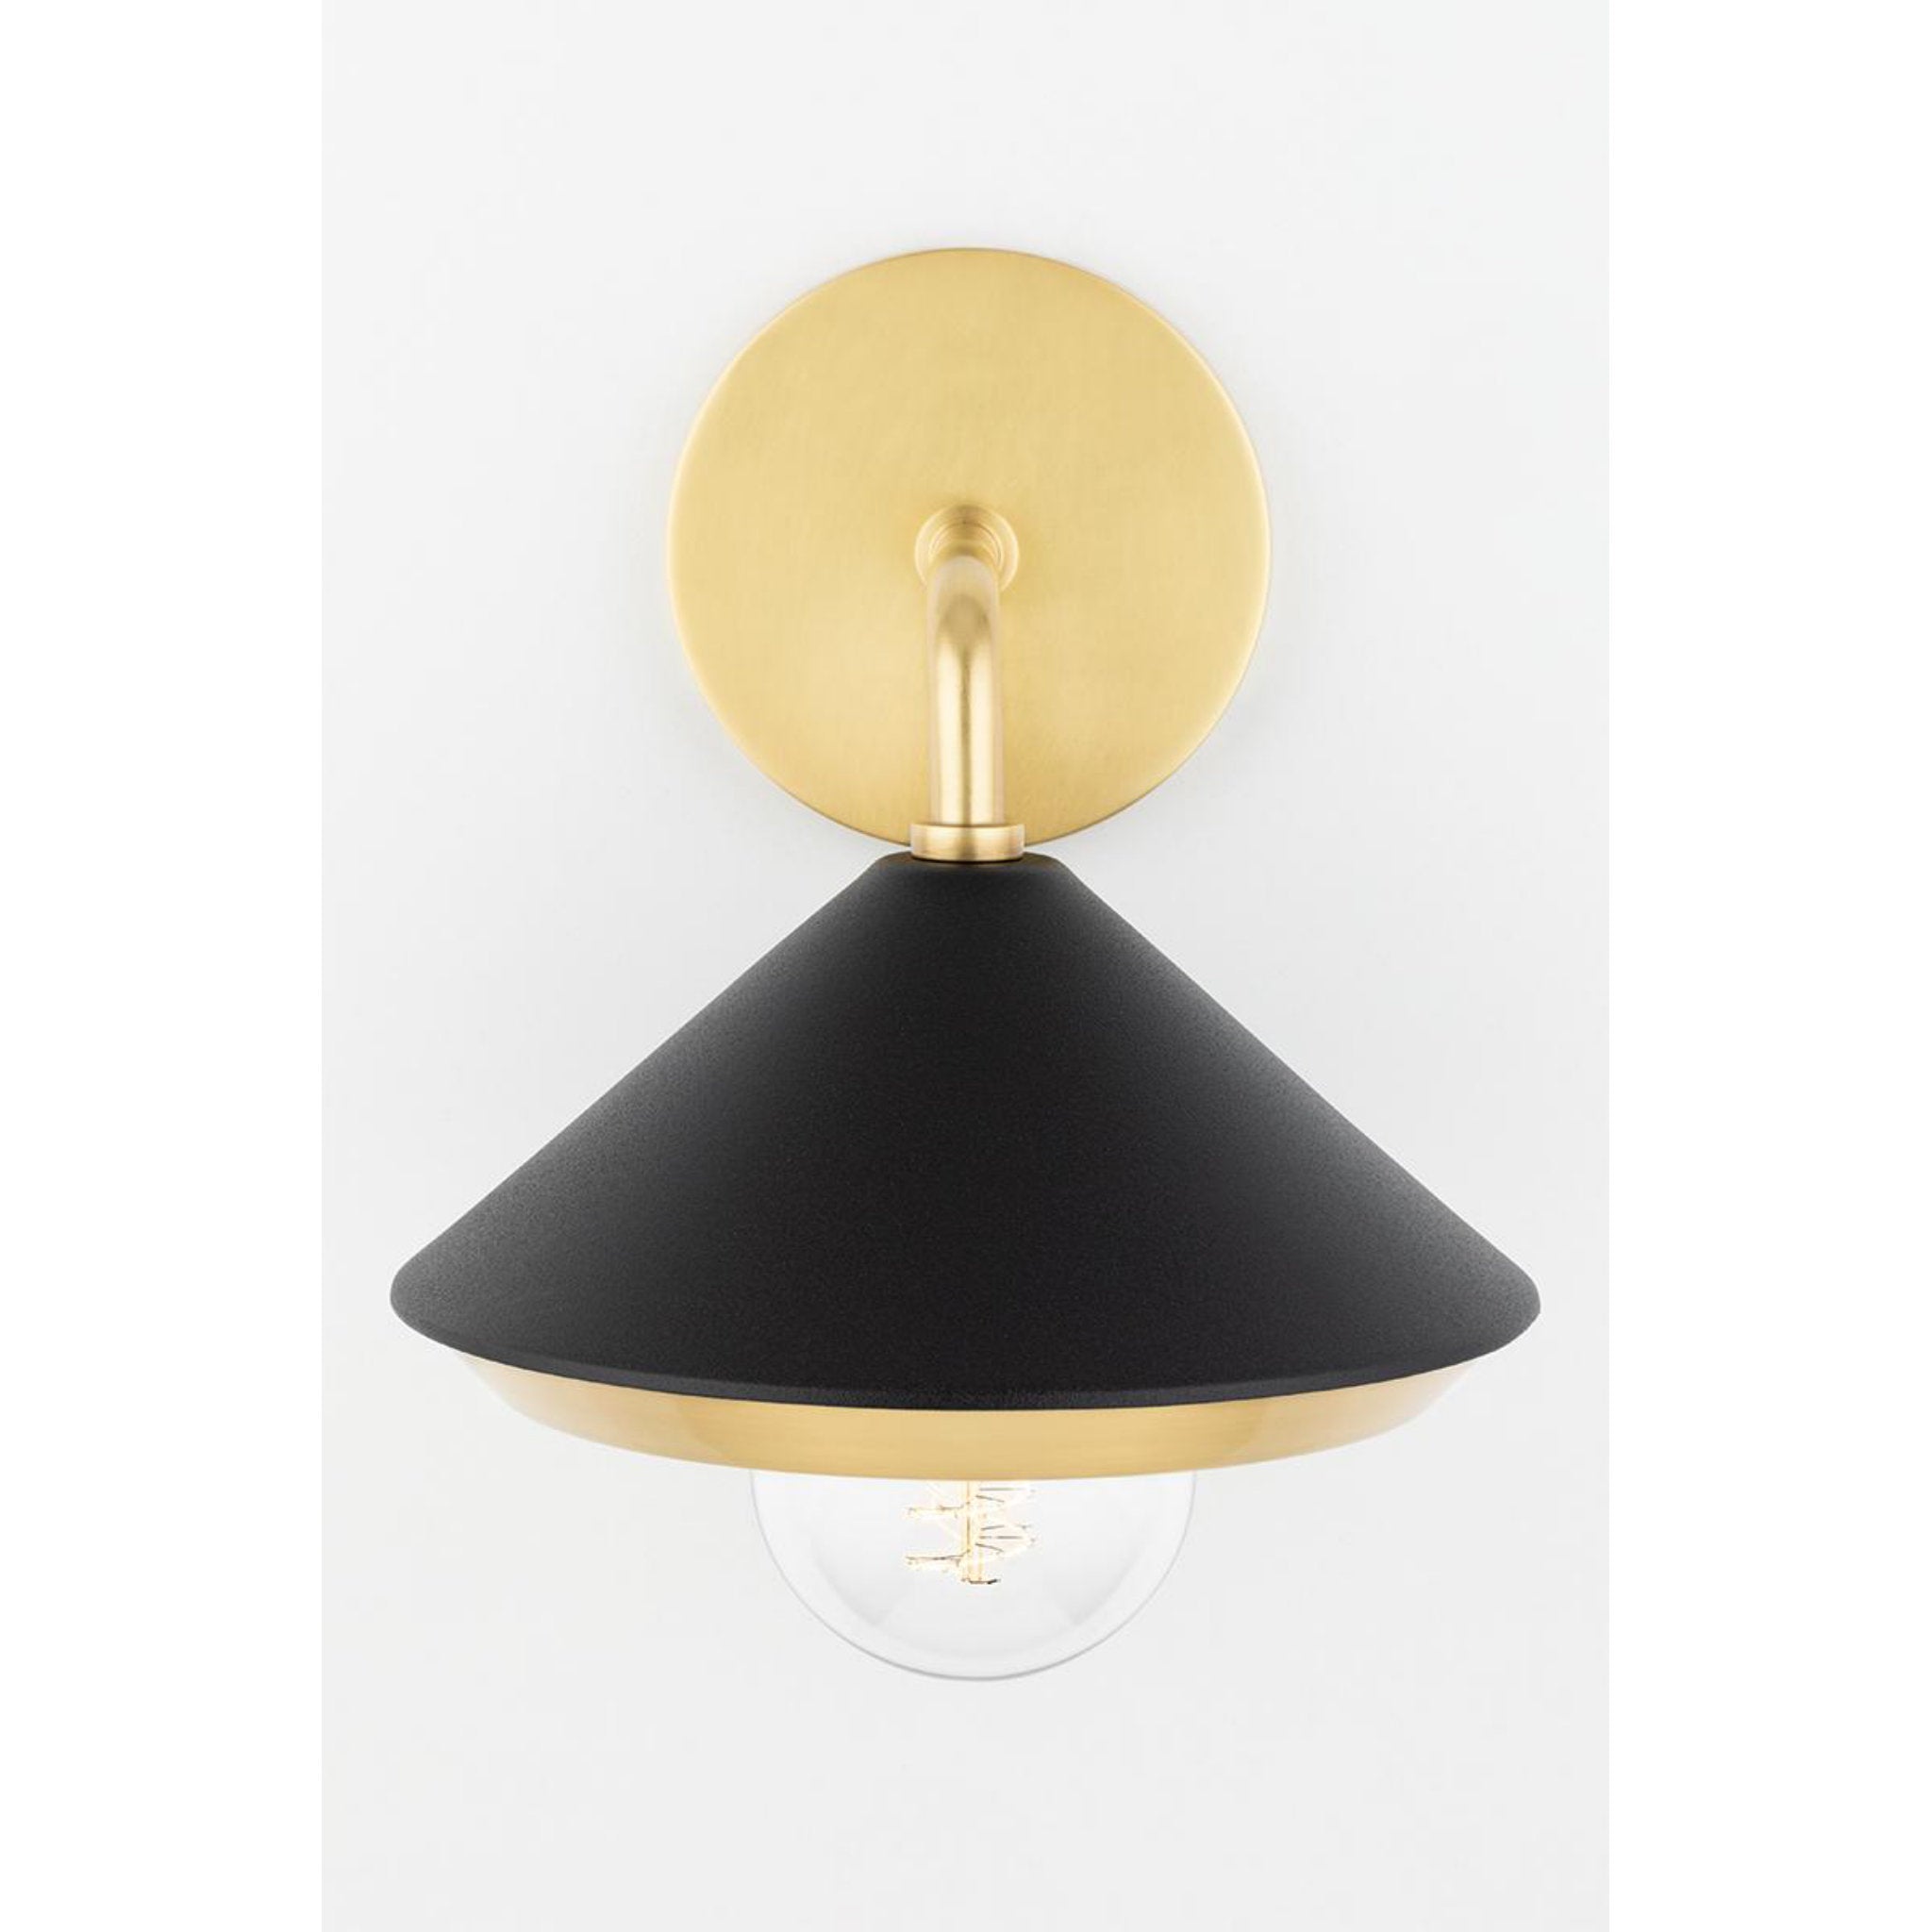 Marnie 1-Light Wall Sconce in Aged Brass/Black